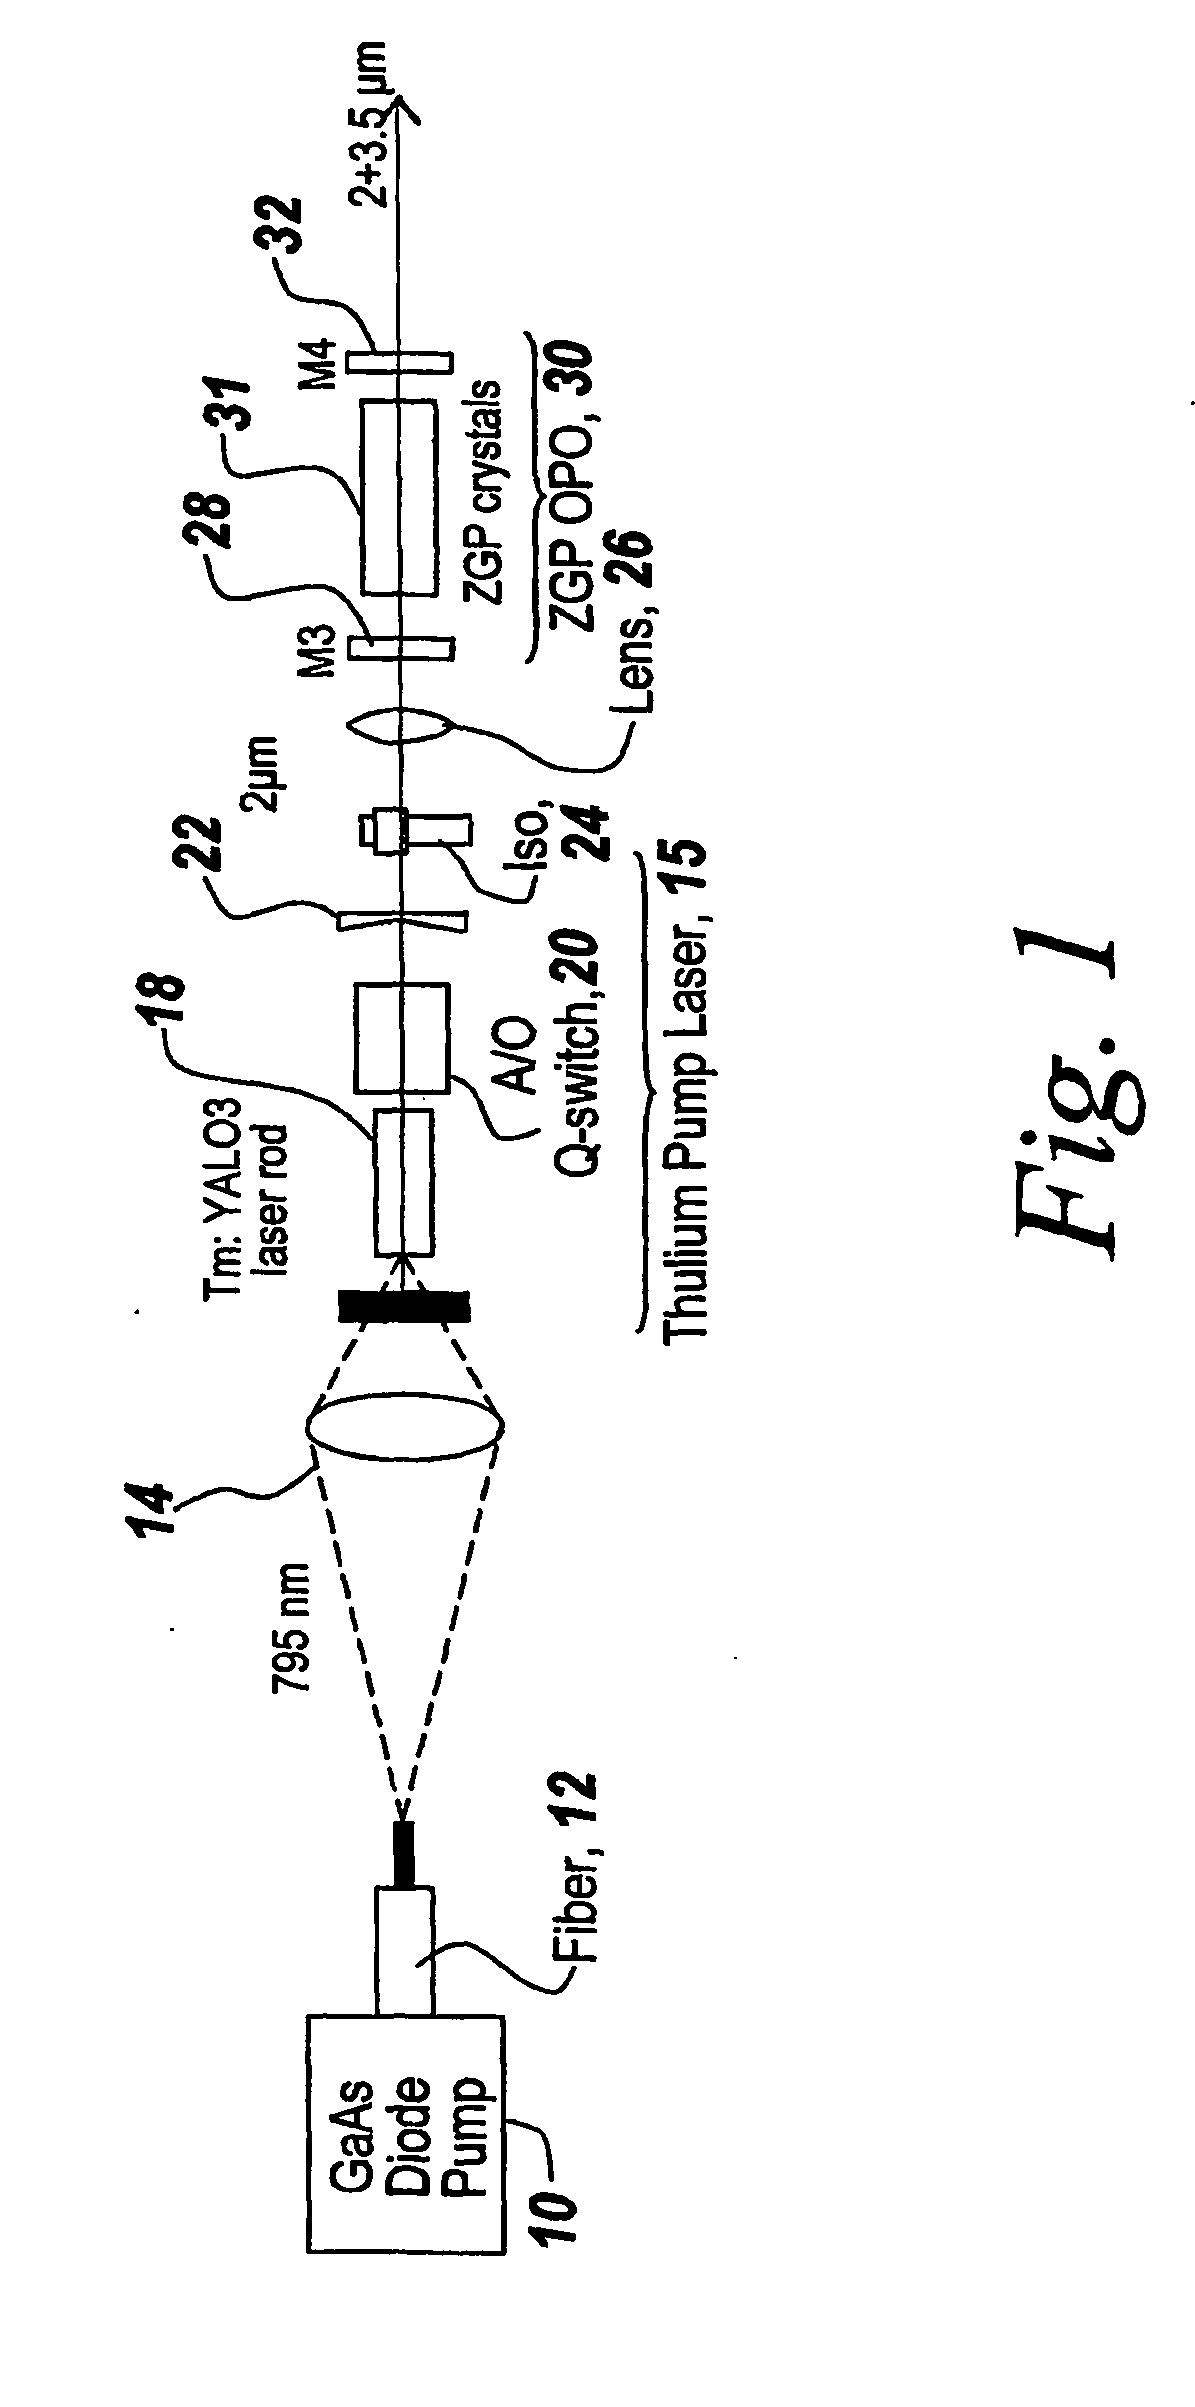 Thulium laser pumped mid-ir source with broadbanded output